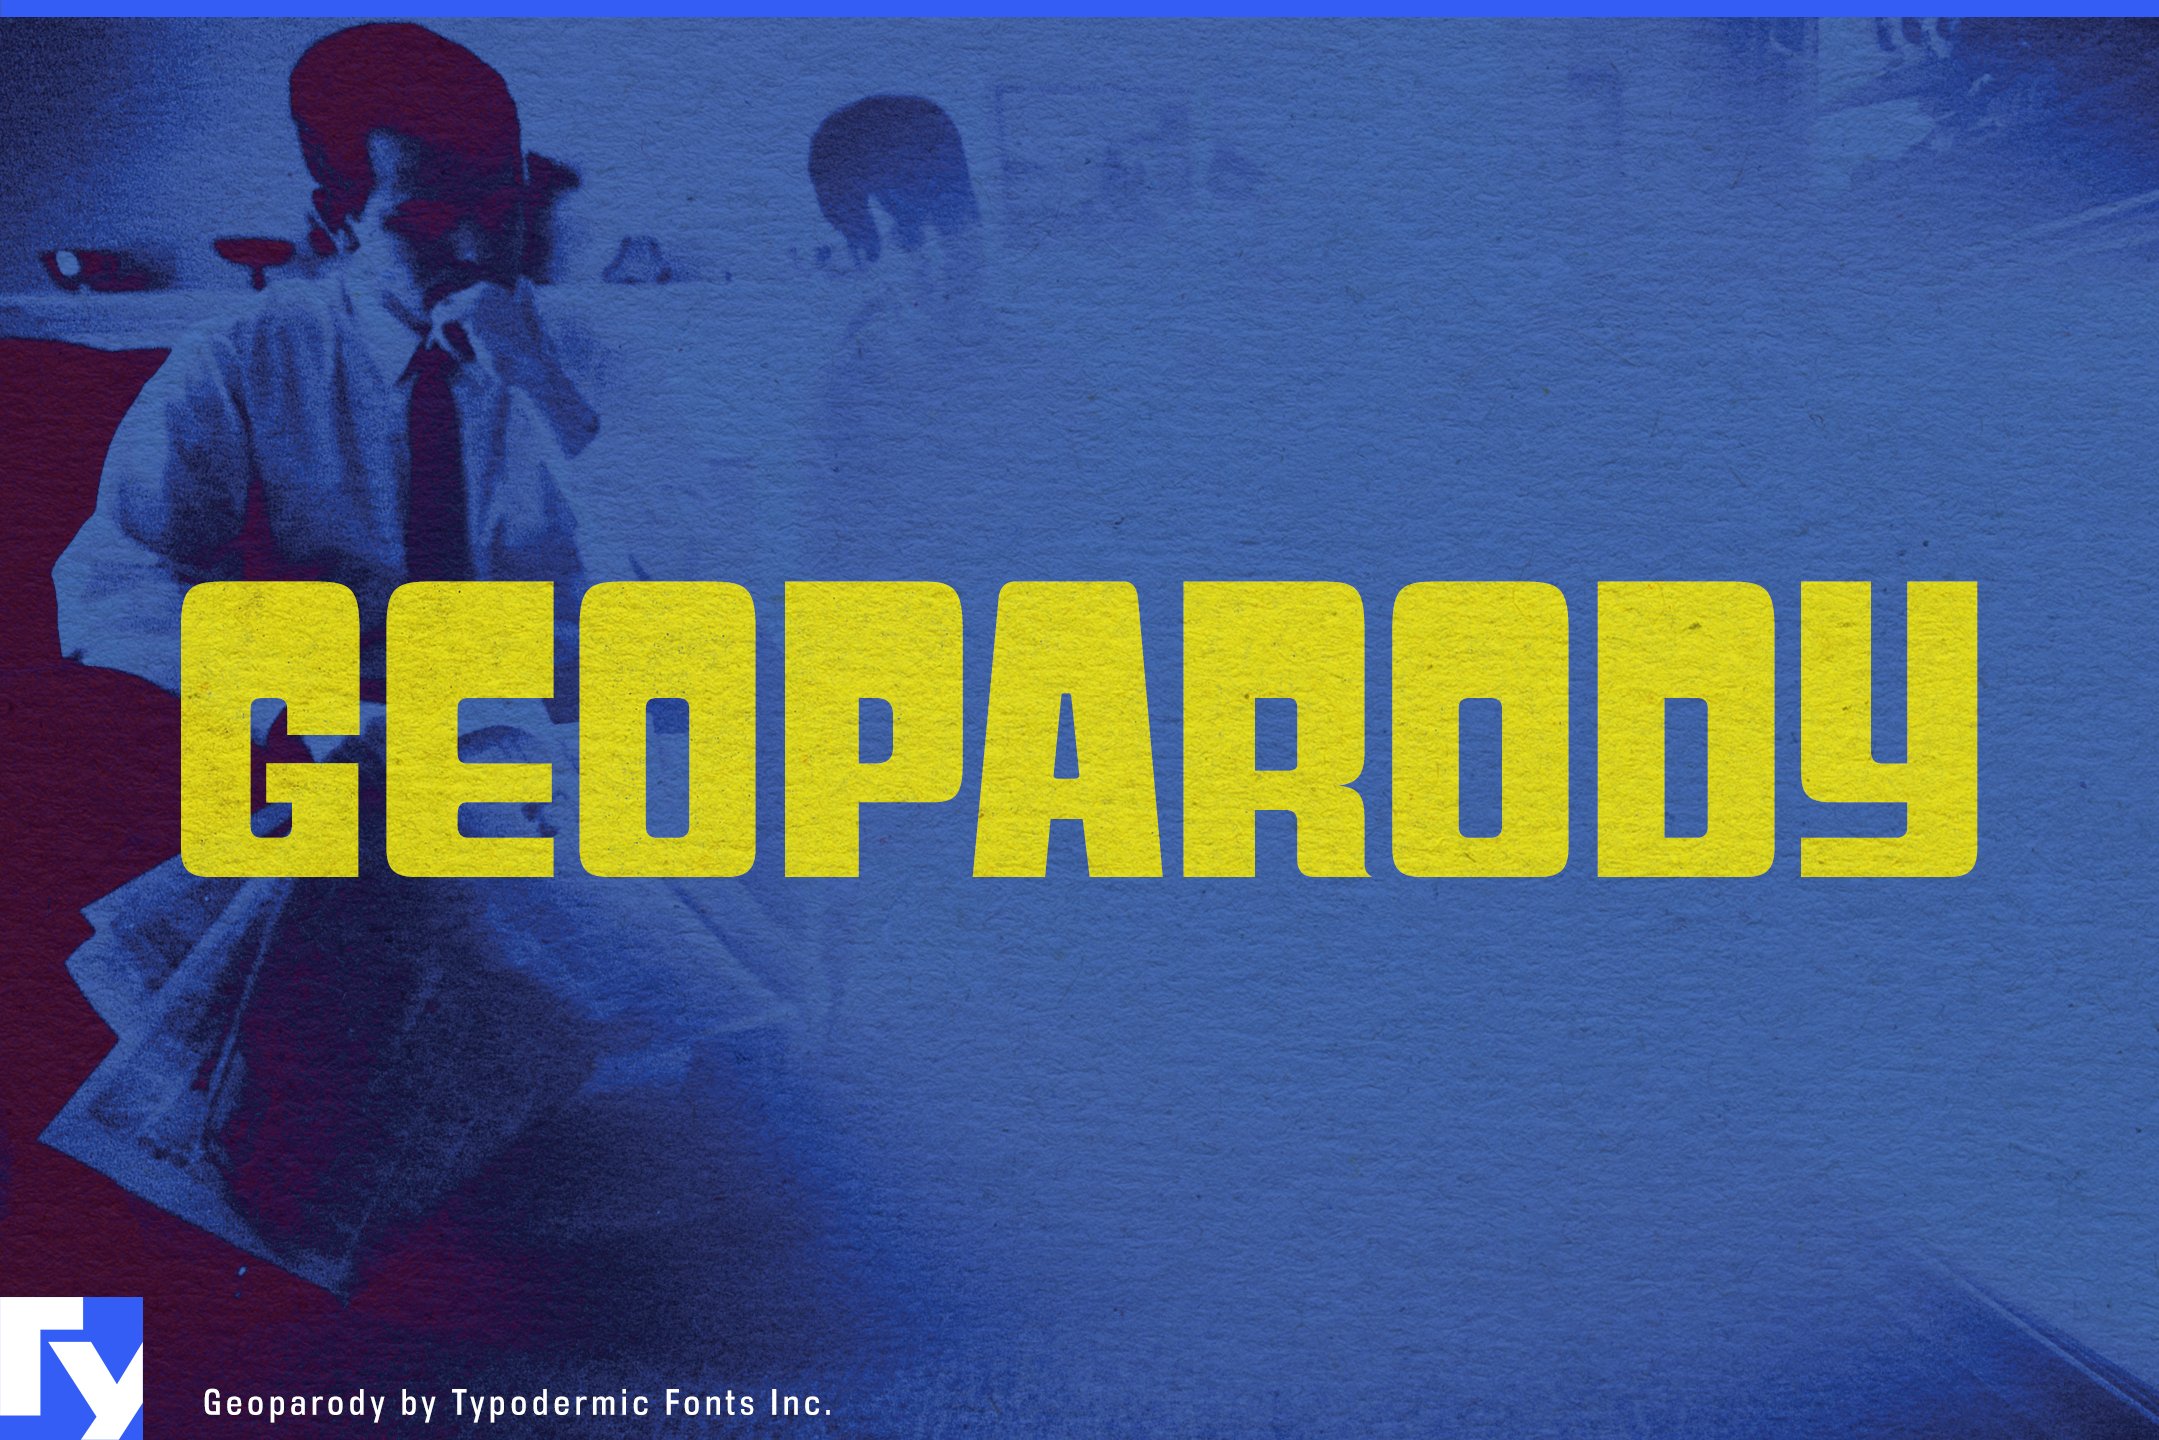 Geoparody cover image.